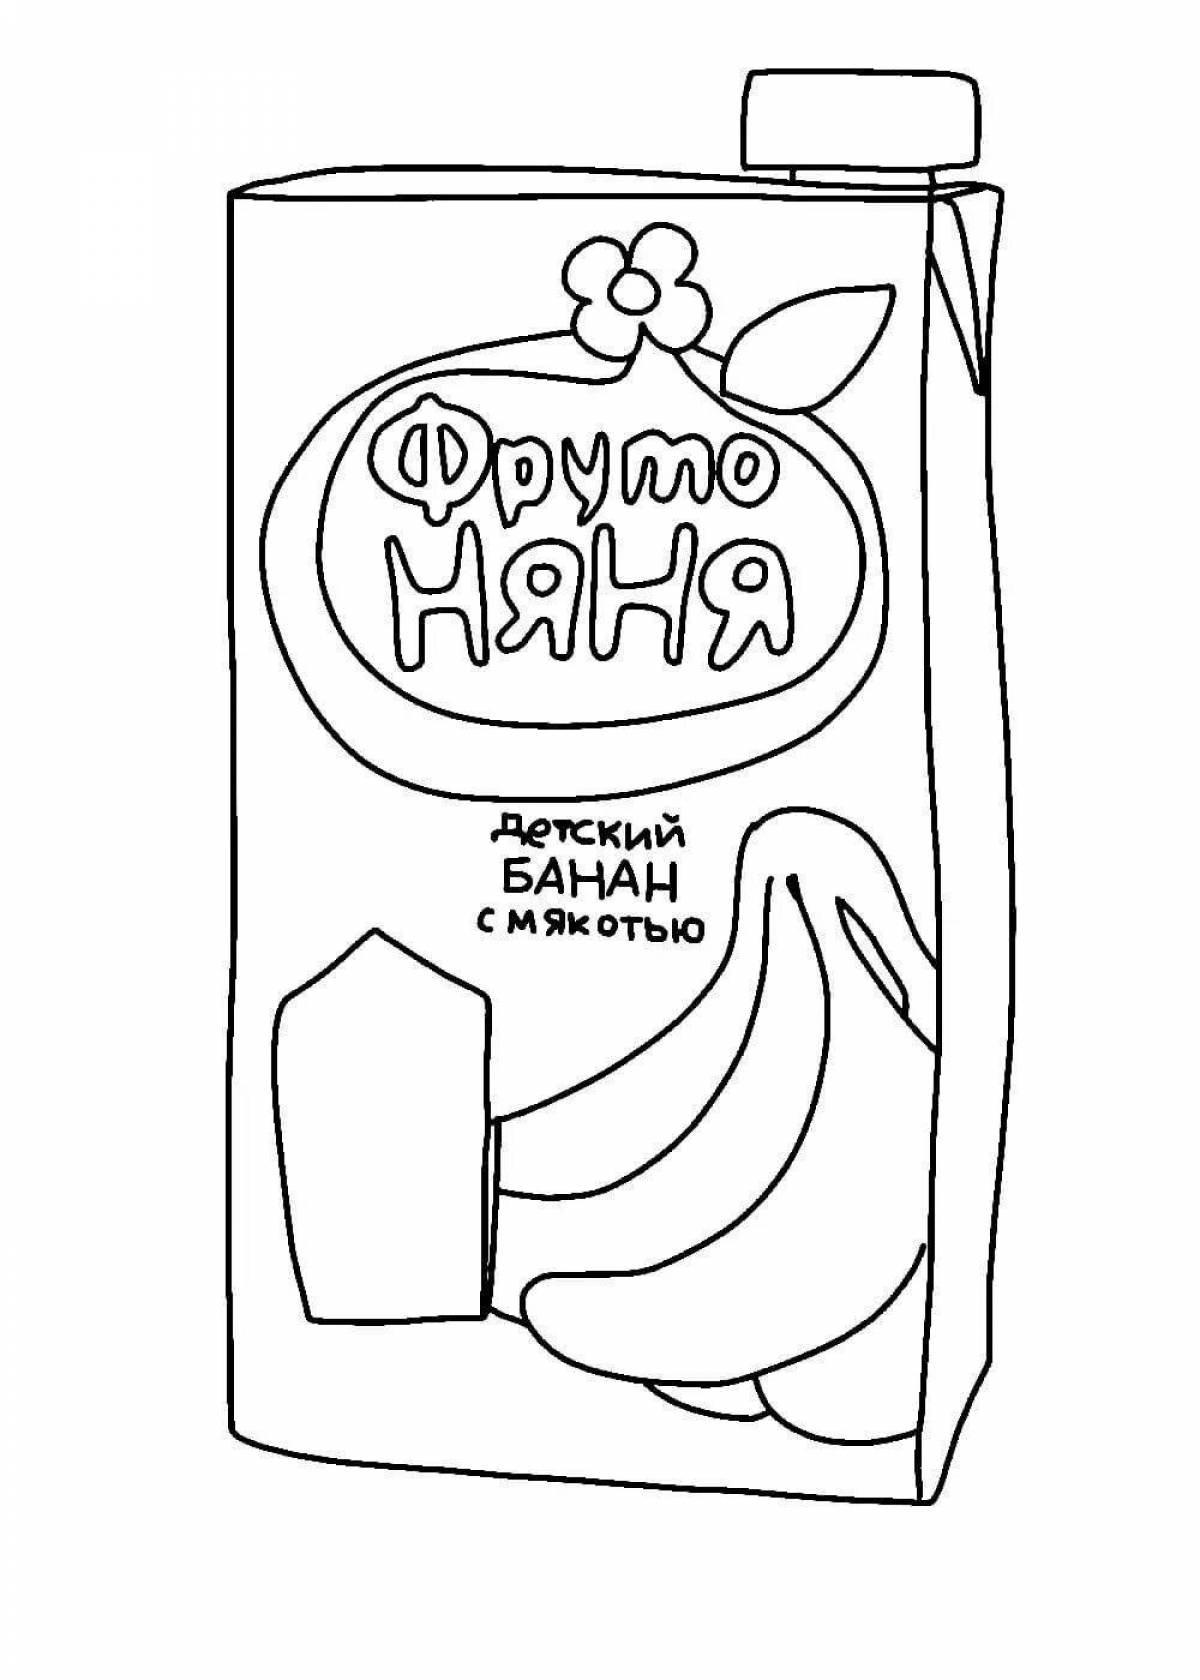 Awesome lola fanfan duck coloring page